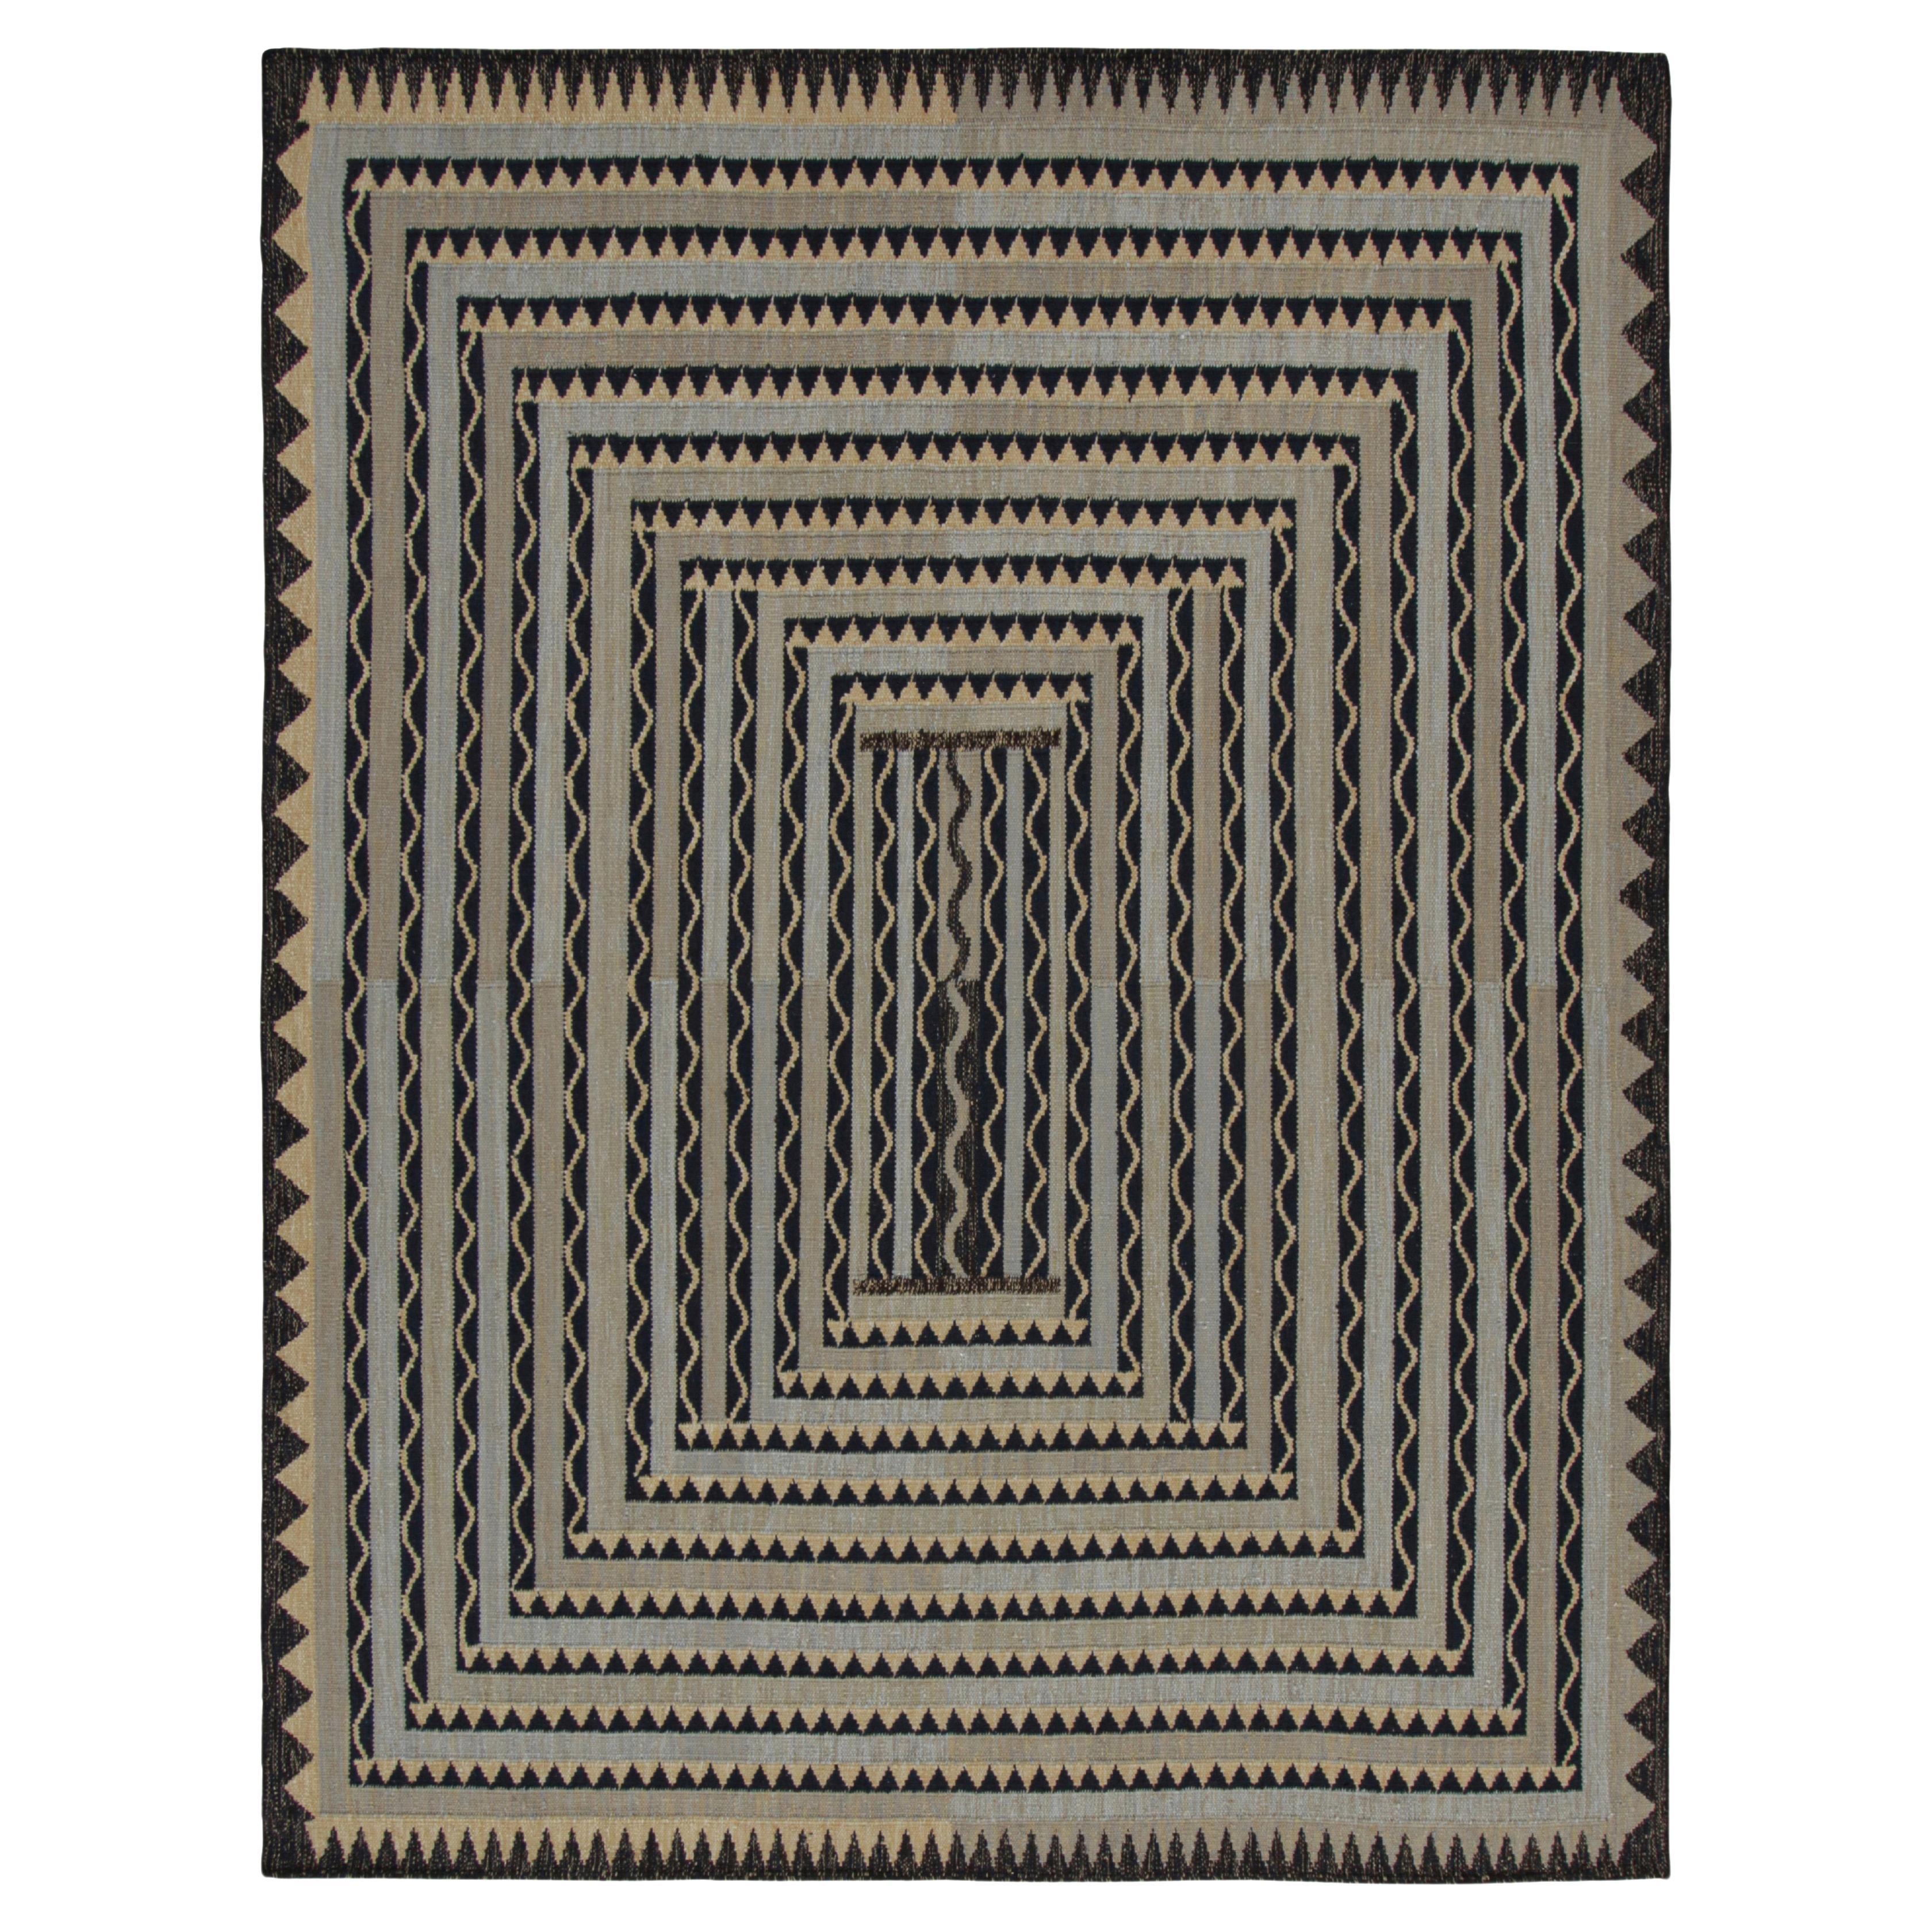 Rug & Kilim’s Scandinavian Style Rug with Black and Gold Geometric Patterns For Sale